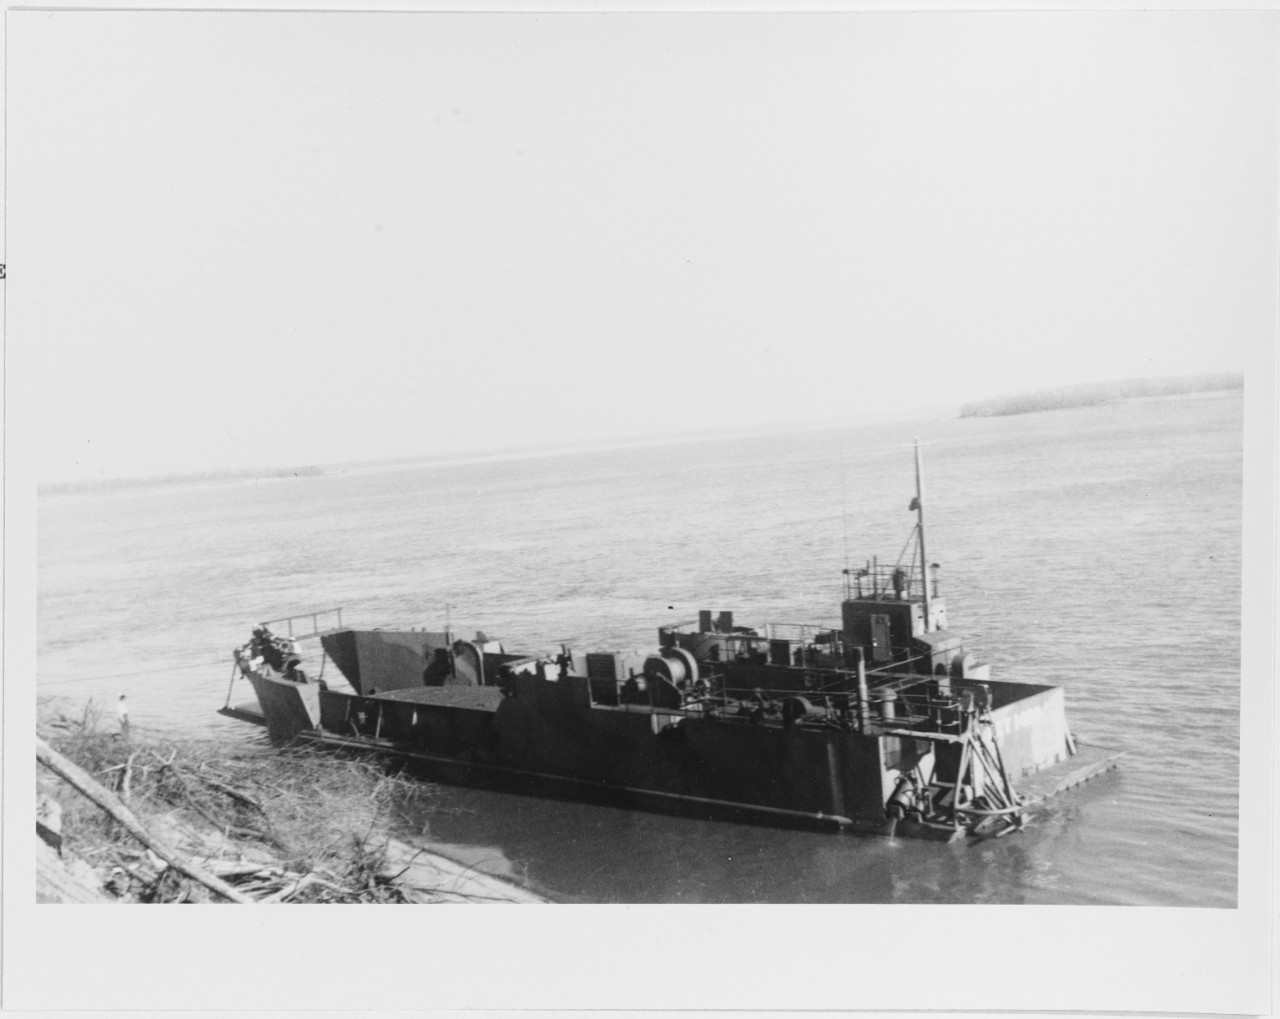 USS LCT-1400 off Island 35, just below Reverie, Tennessee, November 23, 1944